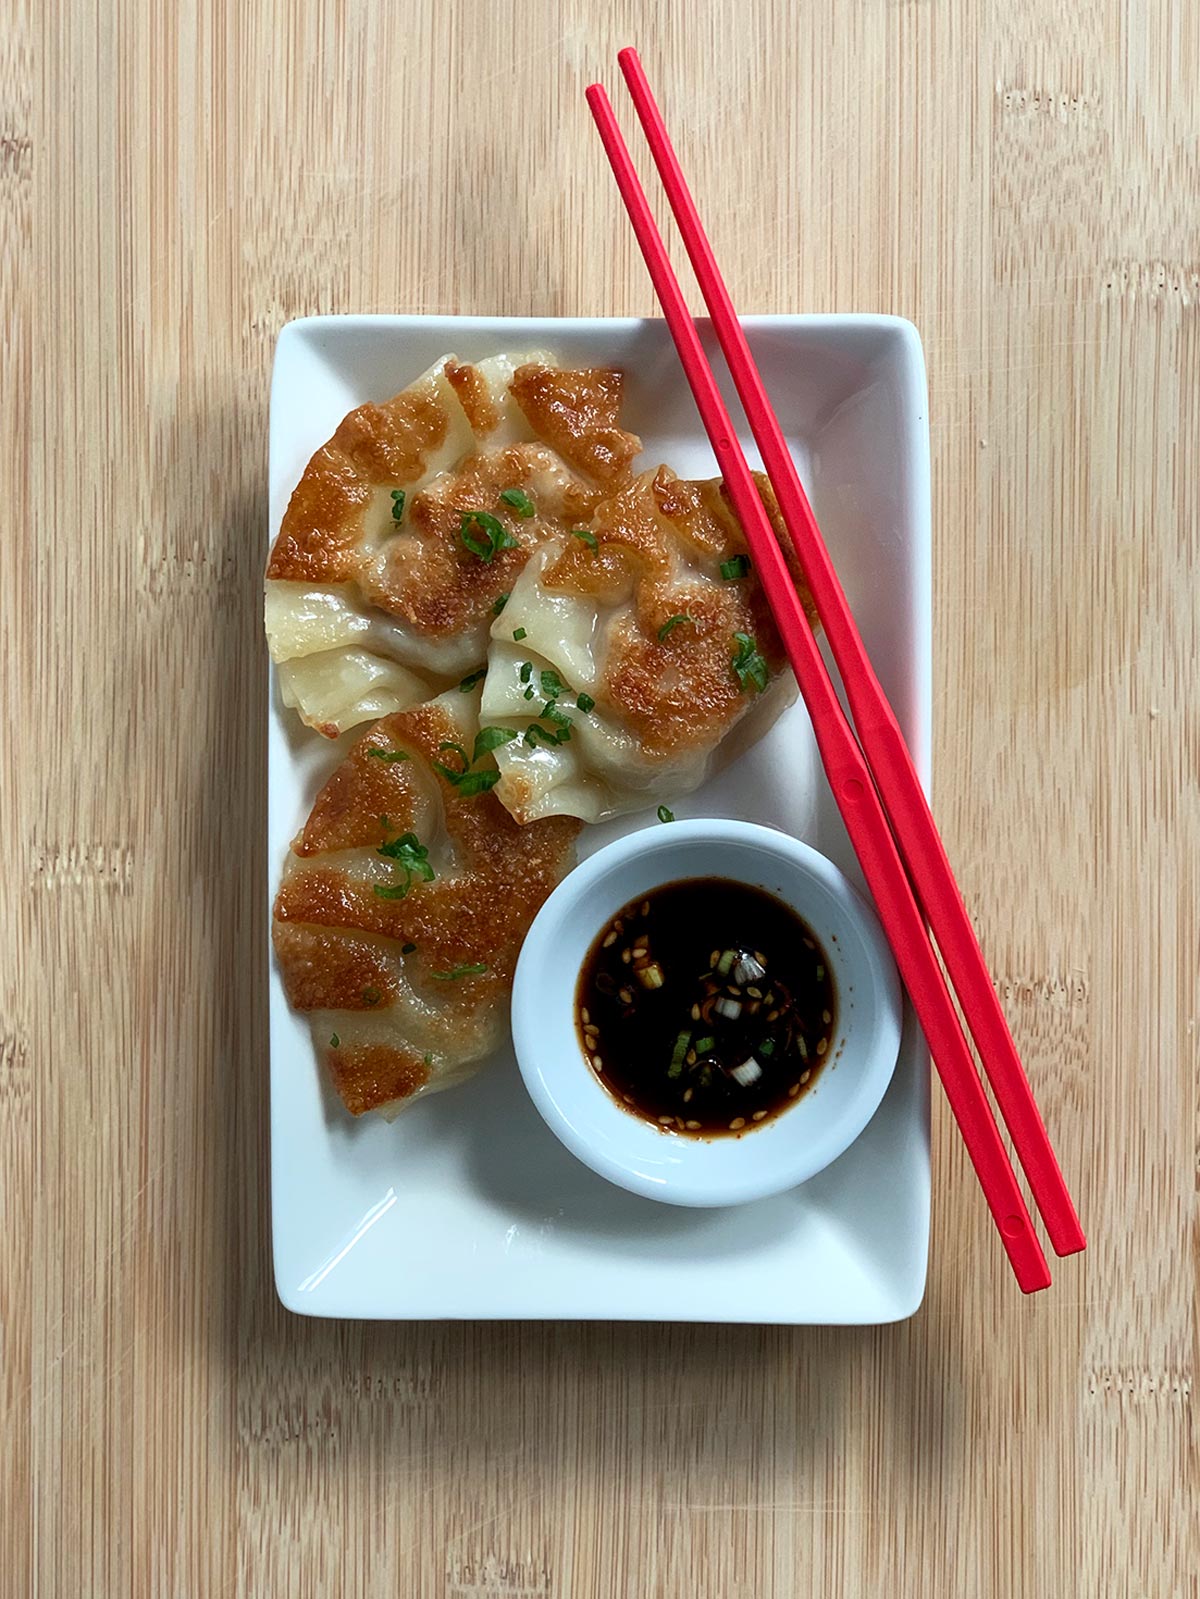 Fried mandu on a white plate with dipping sauce and red chopsticks.